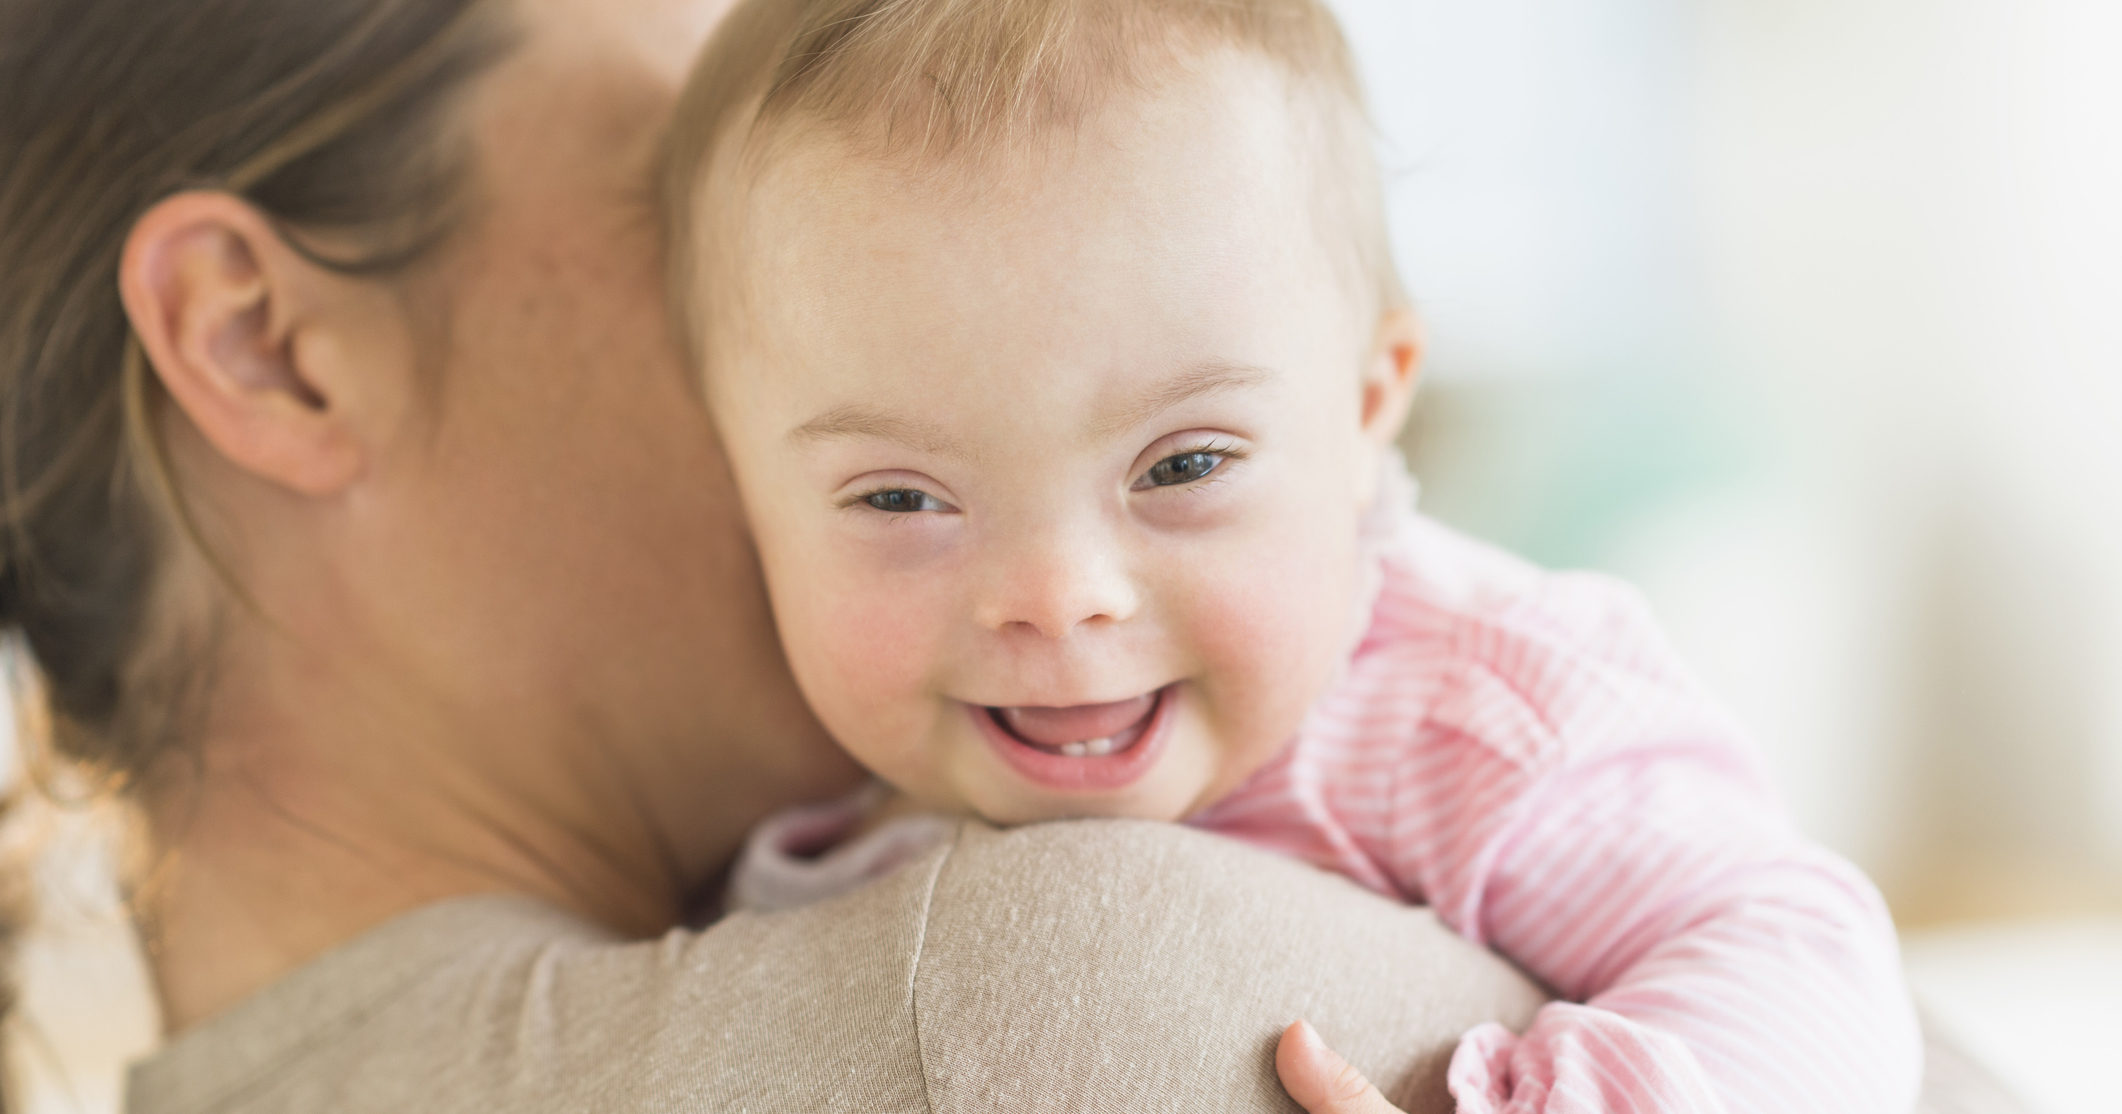 A baby with Down syndrome is pictured in the stock image above.